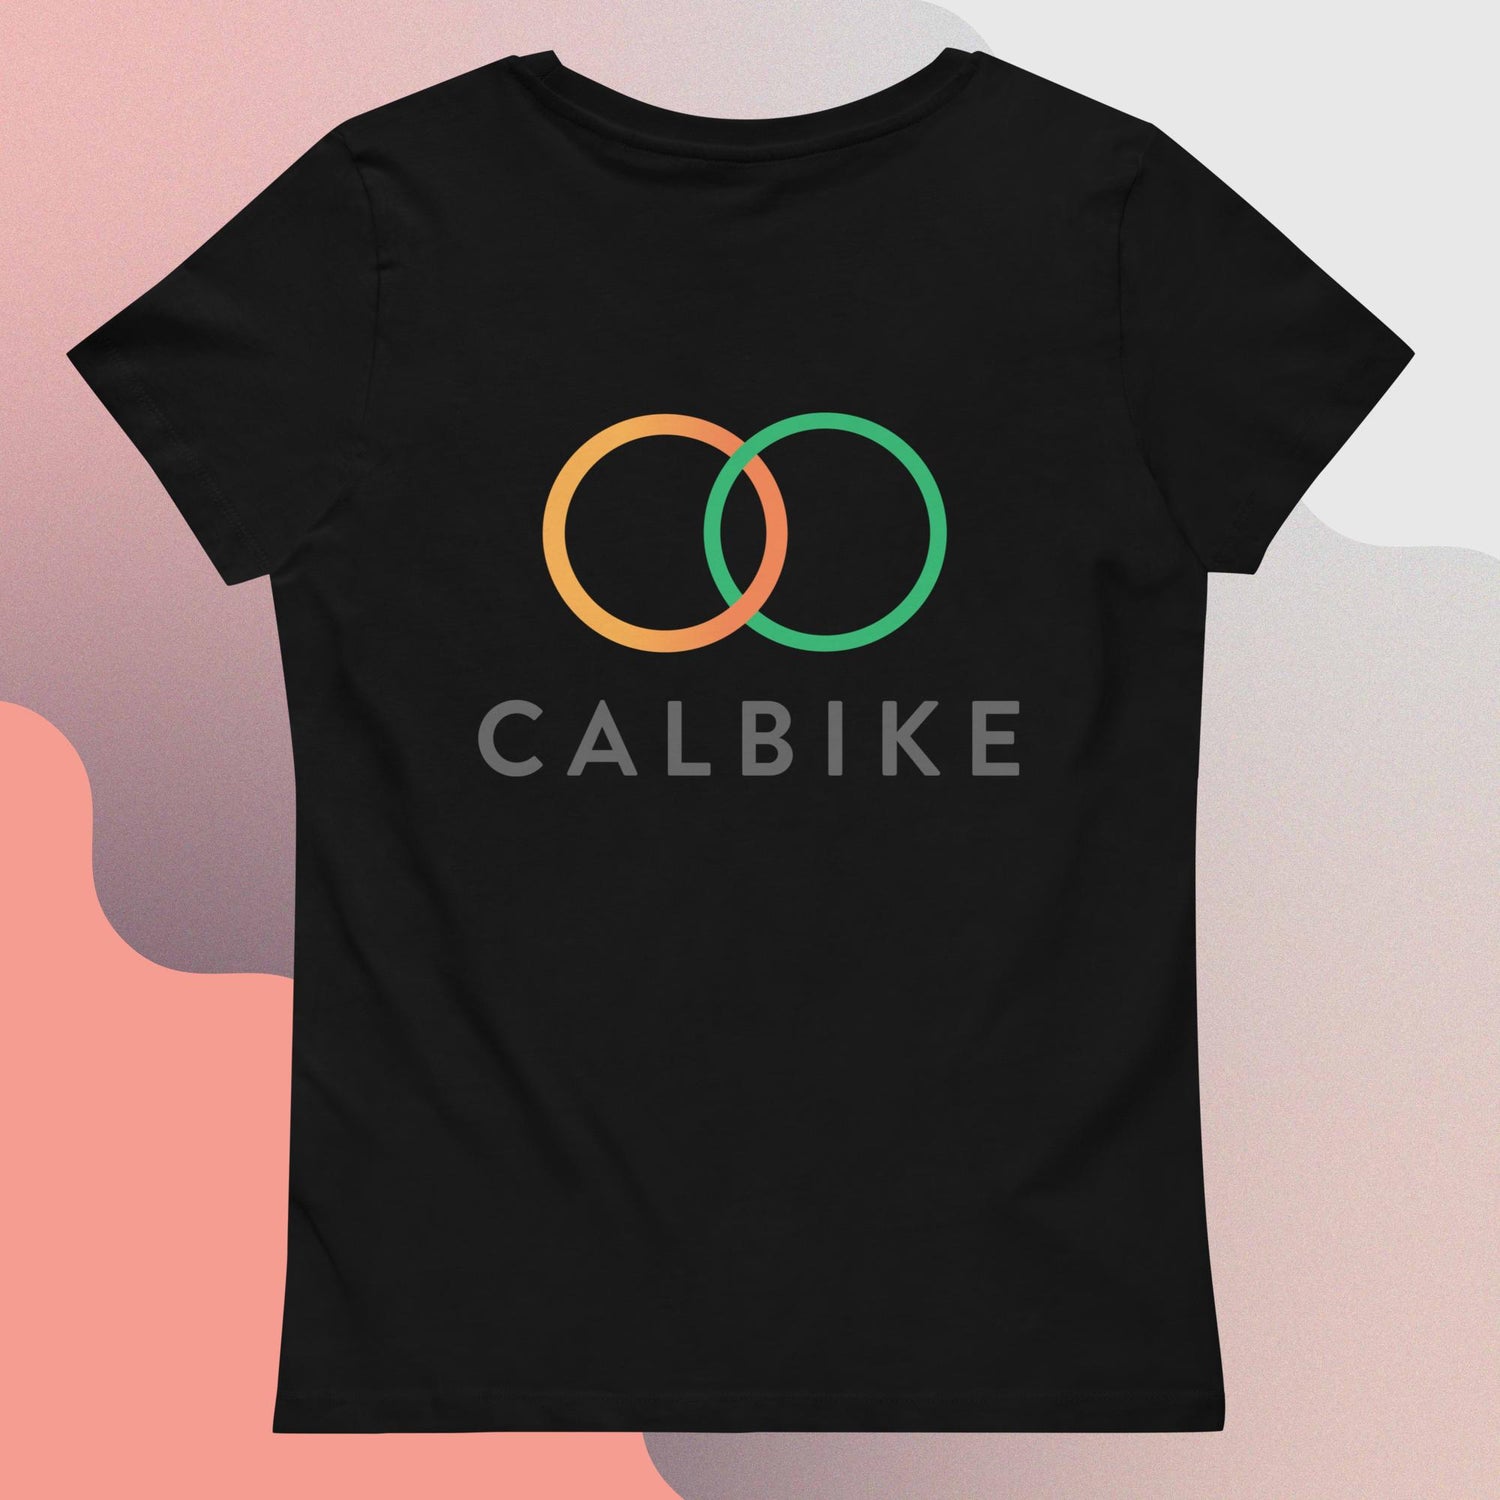 Calbike Women's fitted eco tee